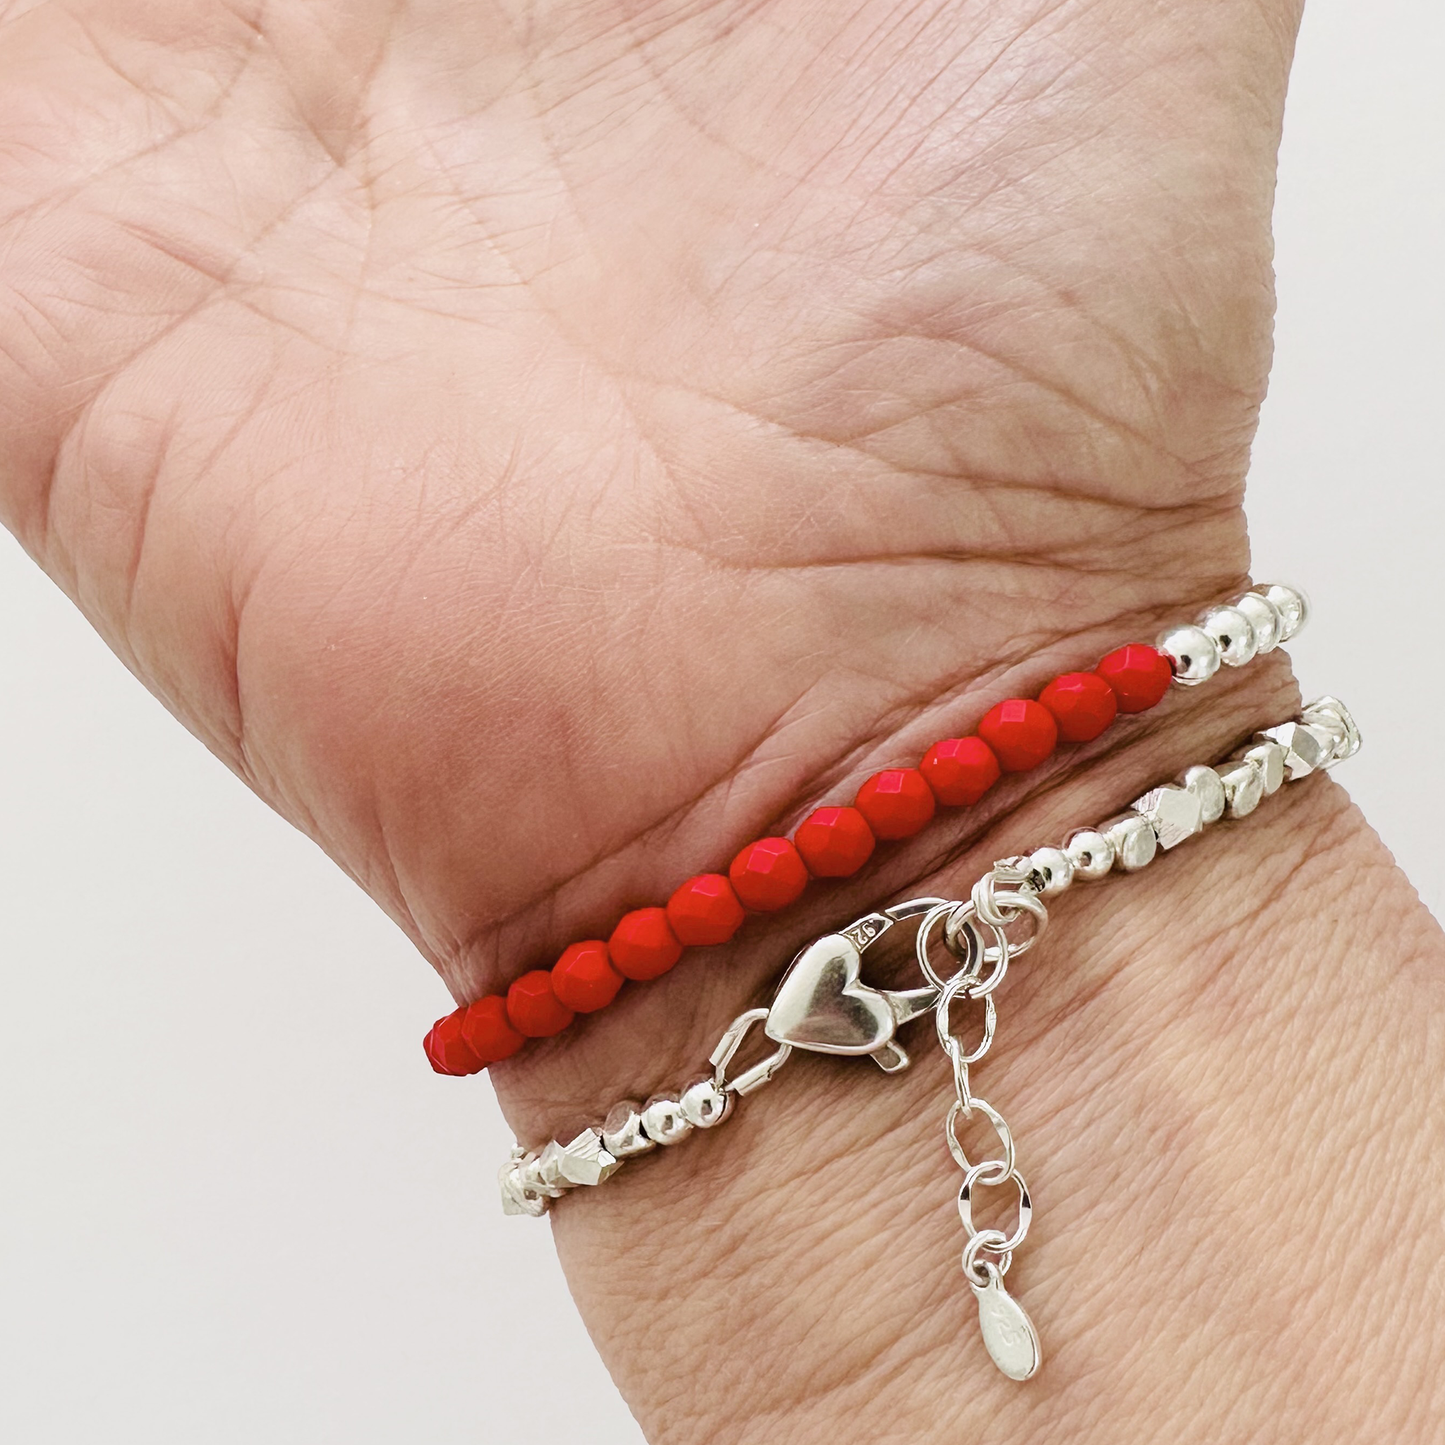 Beloved Love Bracelet with sterling silver heart clasp and red beaded bracelet, shown on woman's wrist